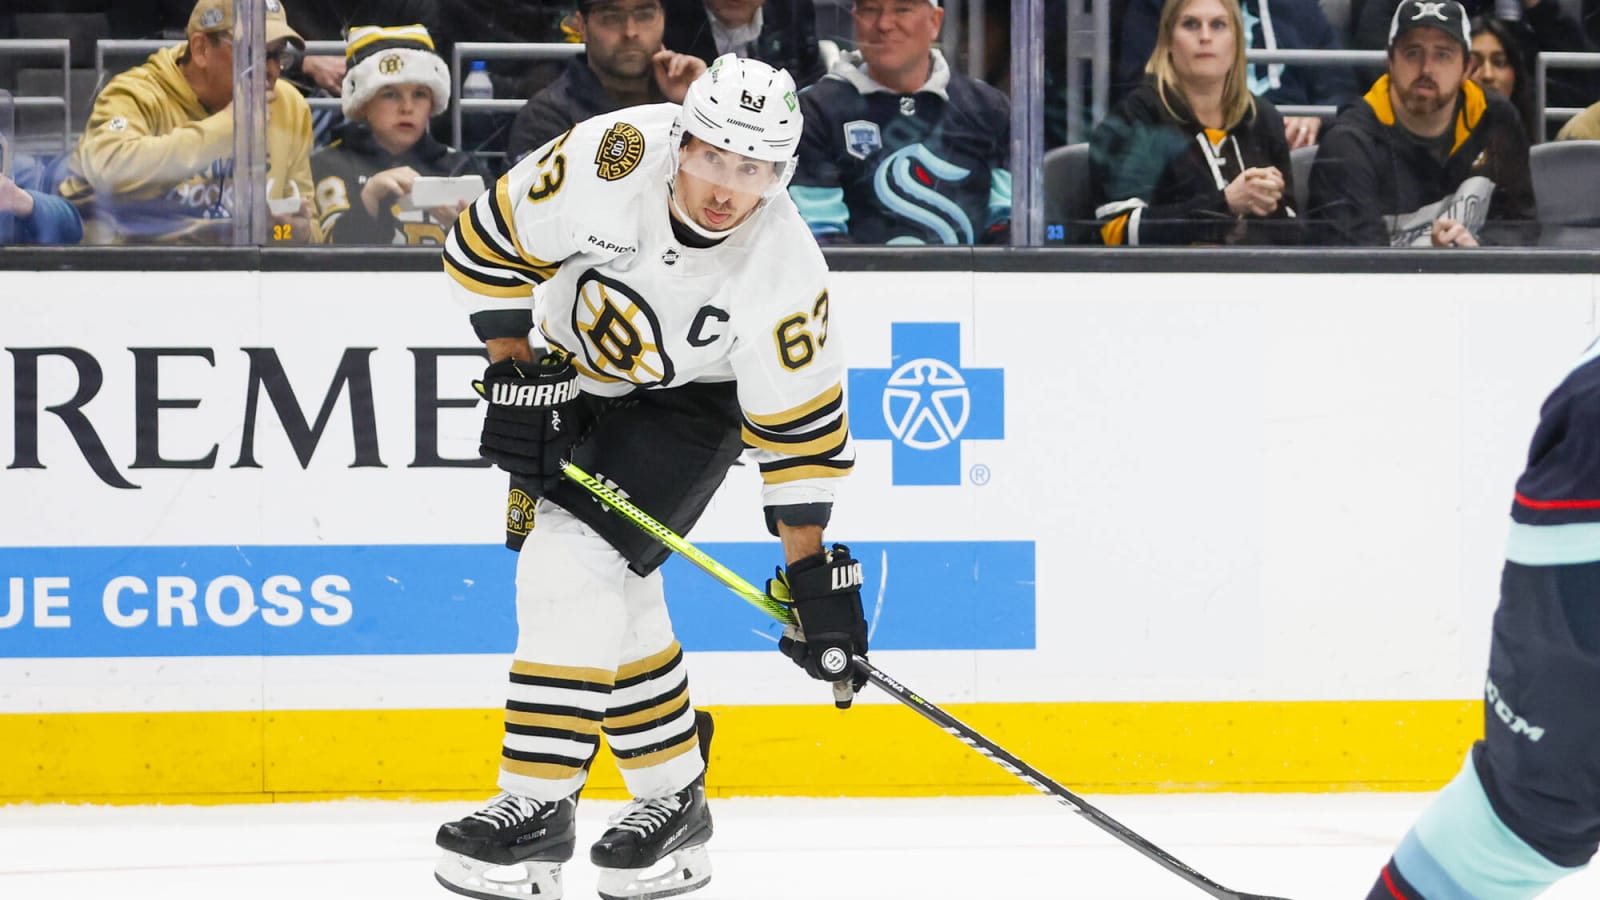 Brad Marchand compares Auston Matthews’ goal-scoring ability with NHL legend Wayne Gretzky following Bruins vs. Leafs game